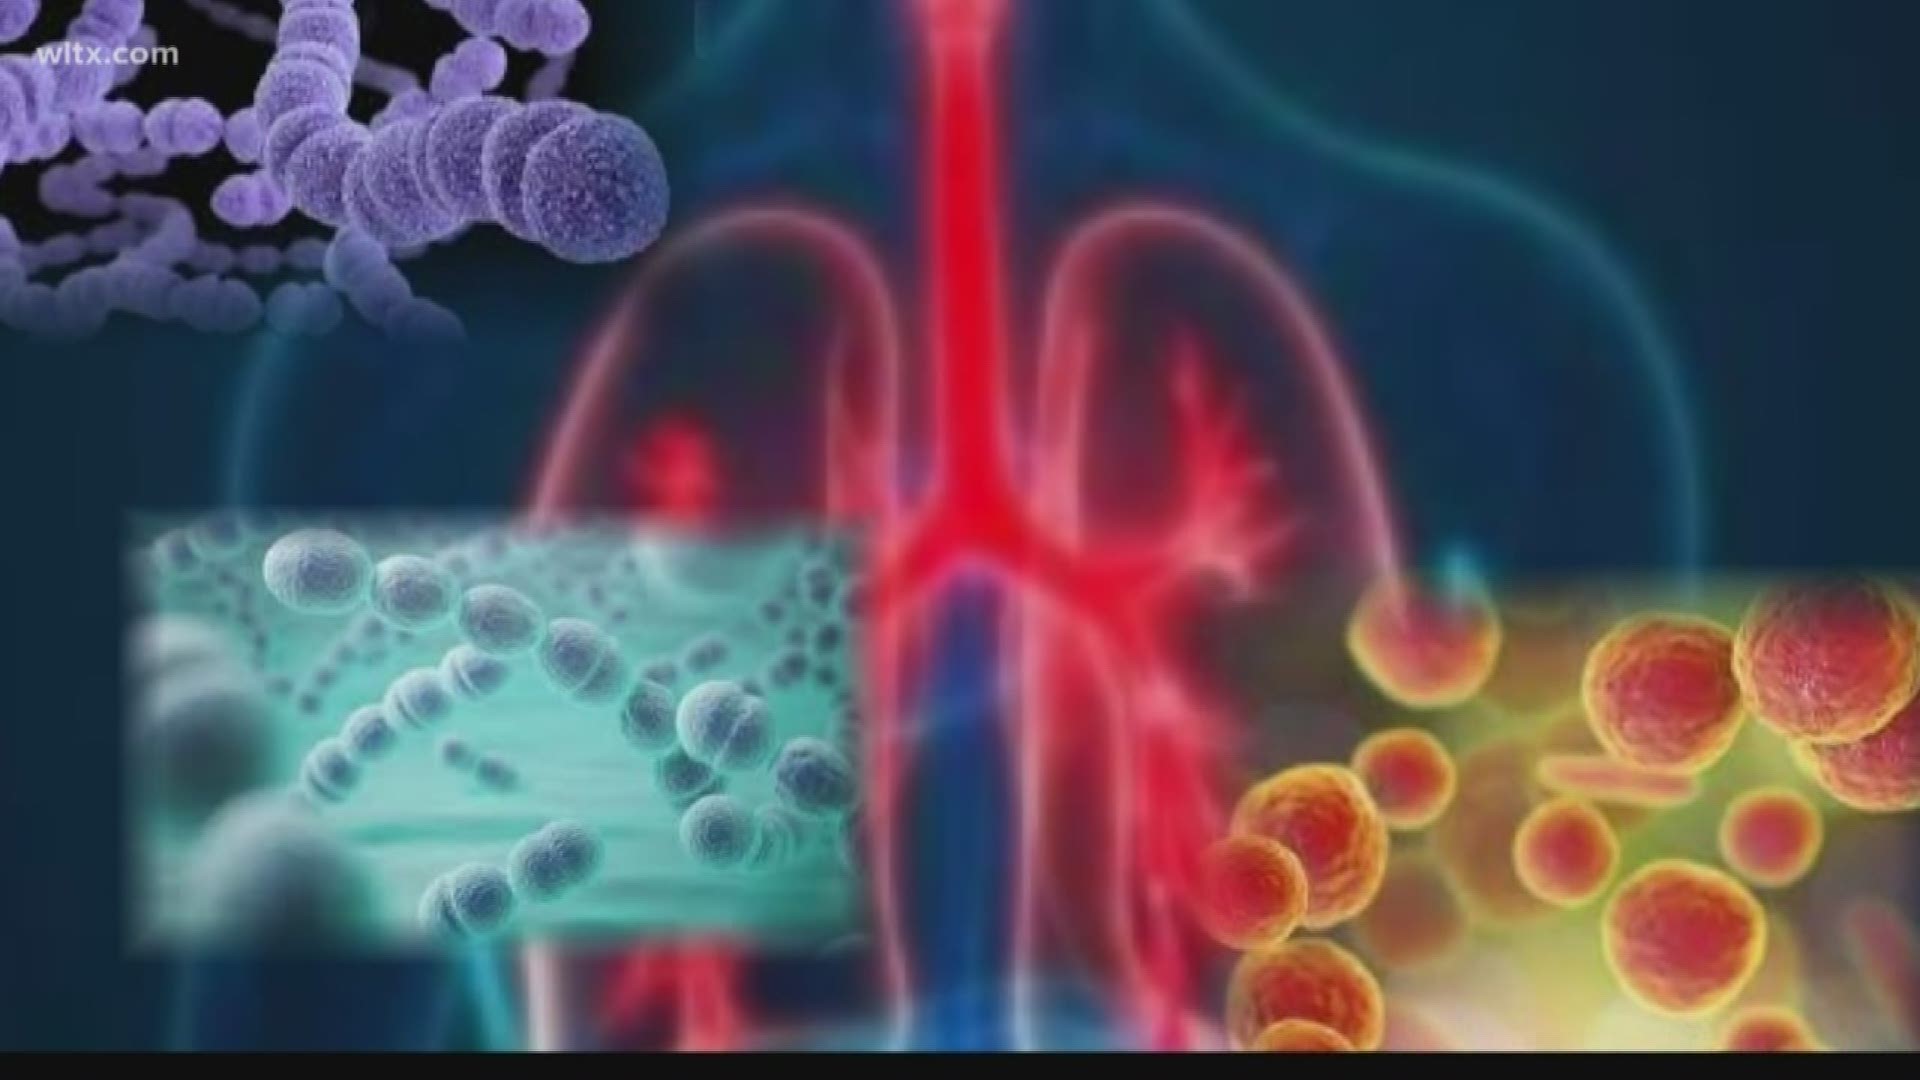 Some celebrities shared what's made them so sick-
it's pneumonia! Medical reporter Rosemarie Beltz explains why it can make people so sick!